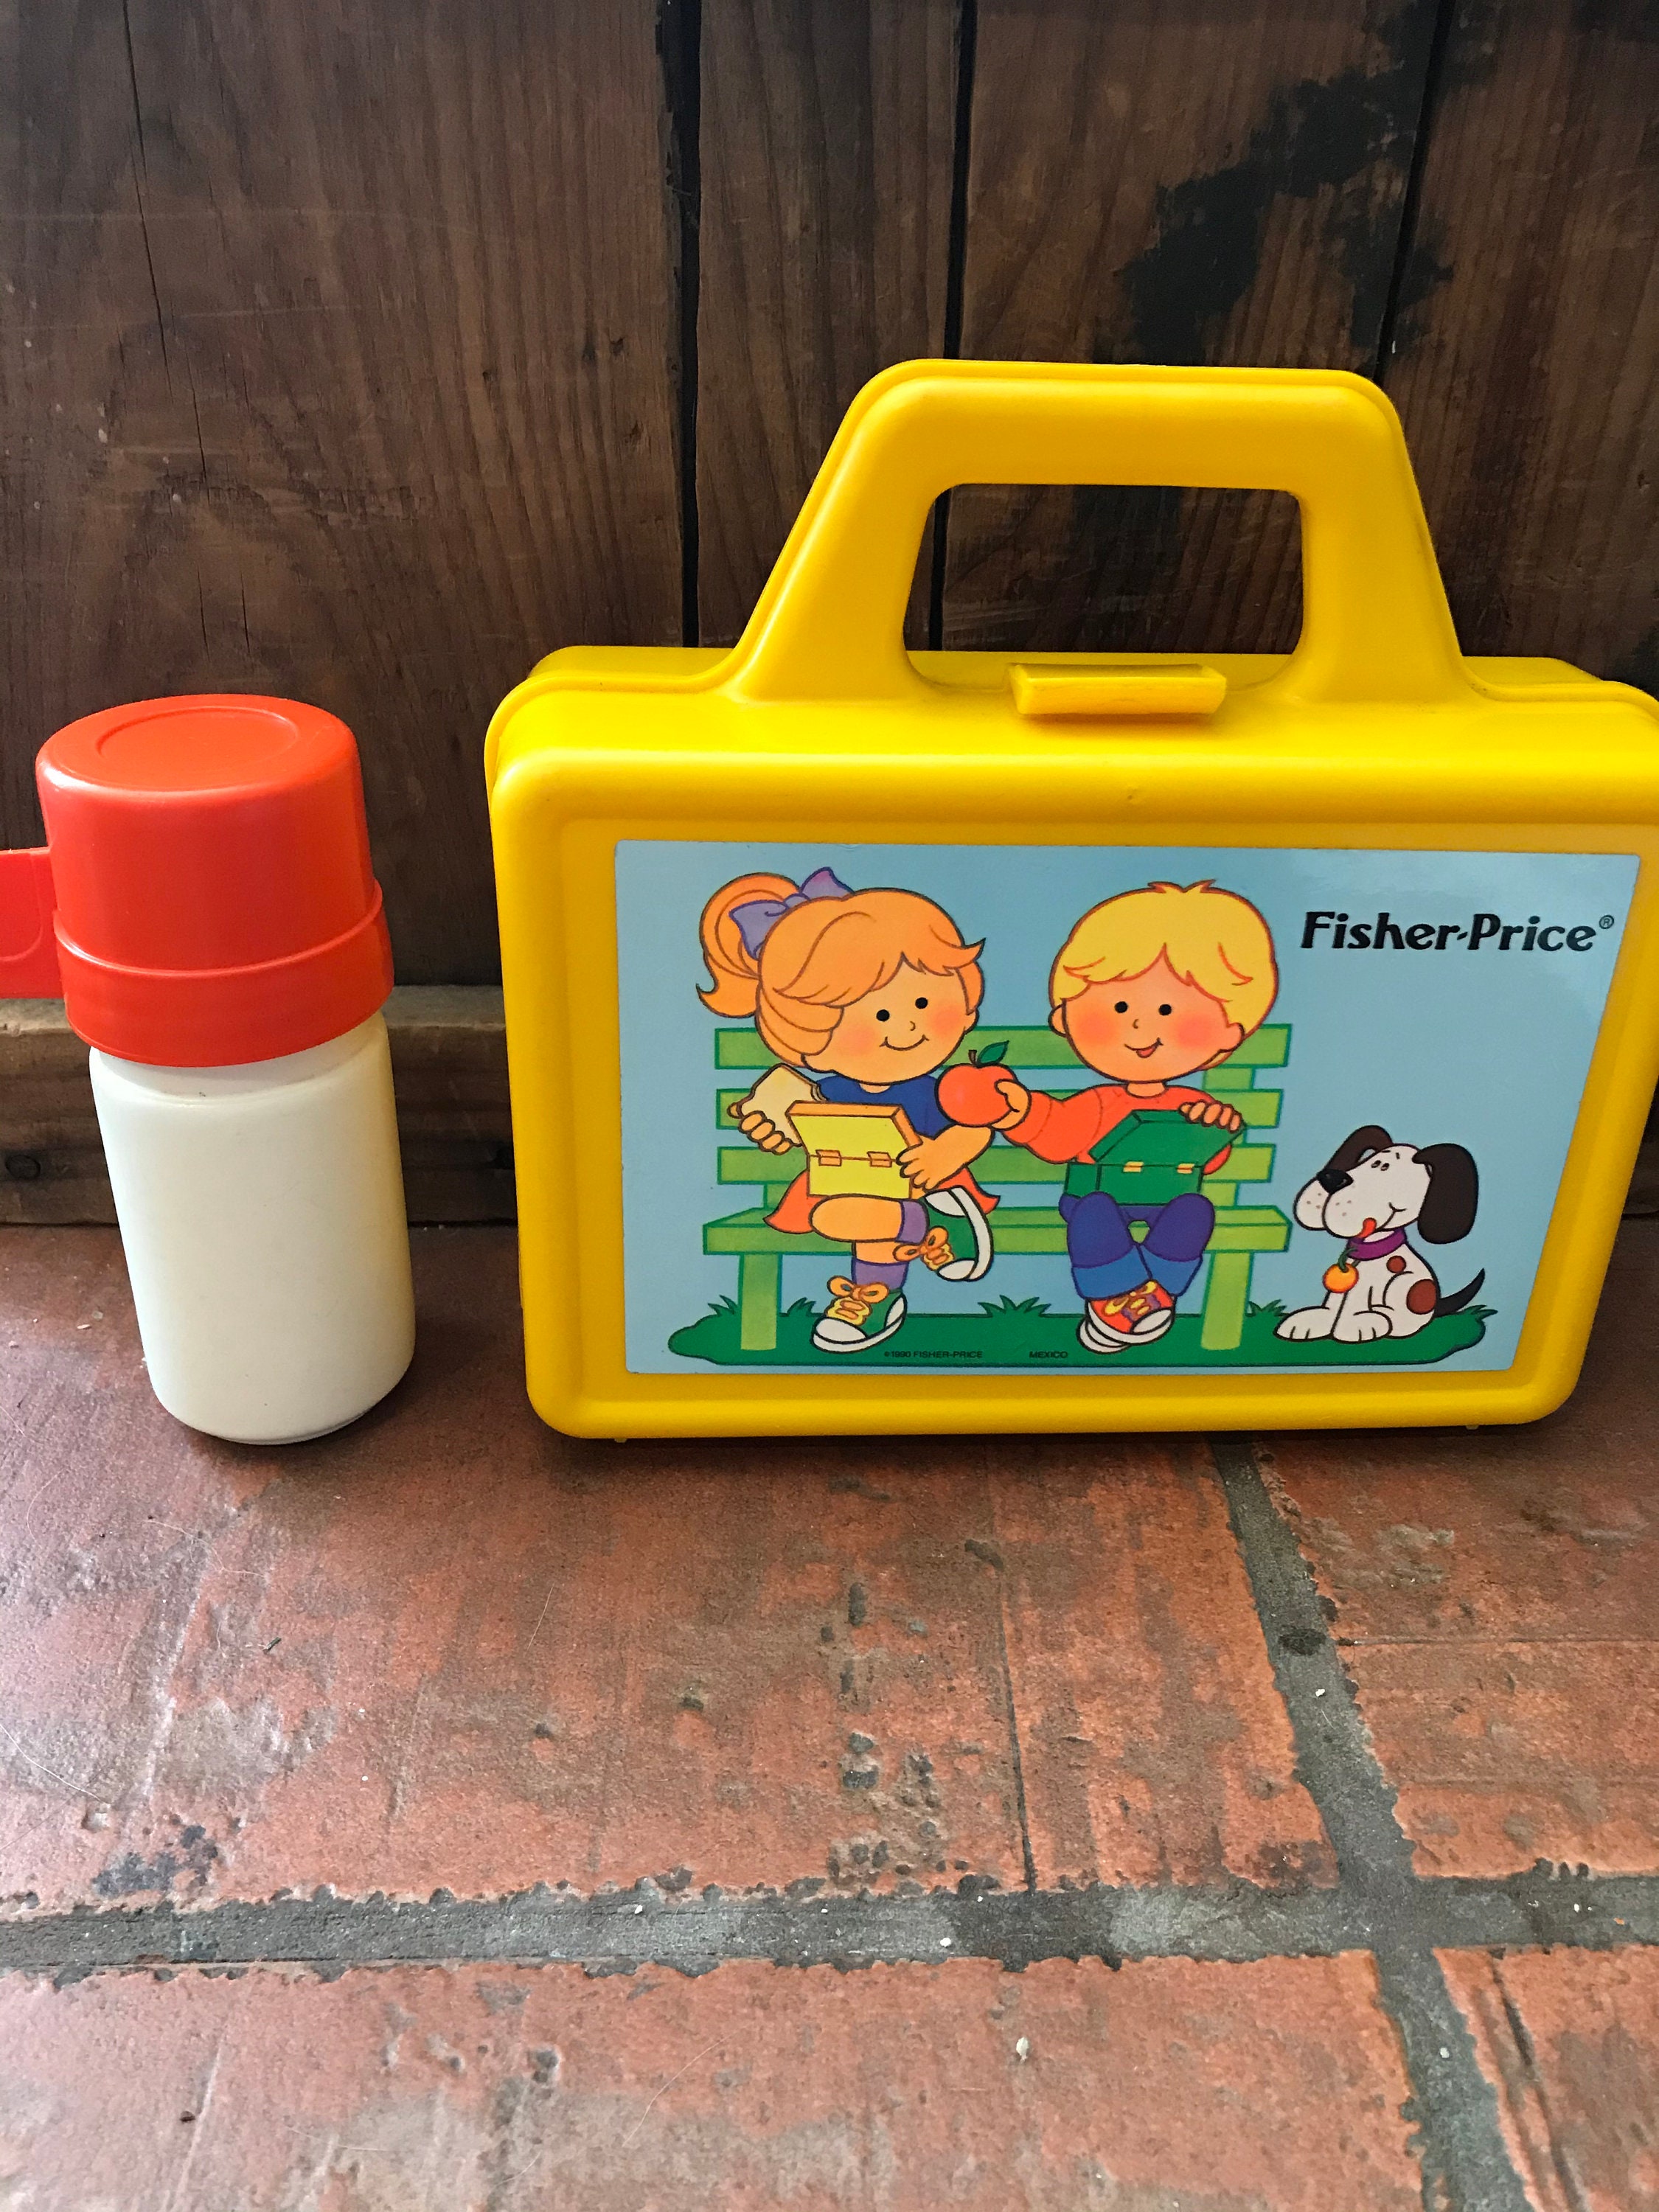 Details about   Fisher Price Fun with Food Picnic Cooler Thermos Pitcher Orange Yellow 1985 